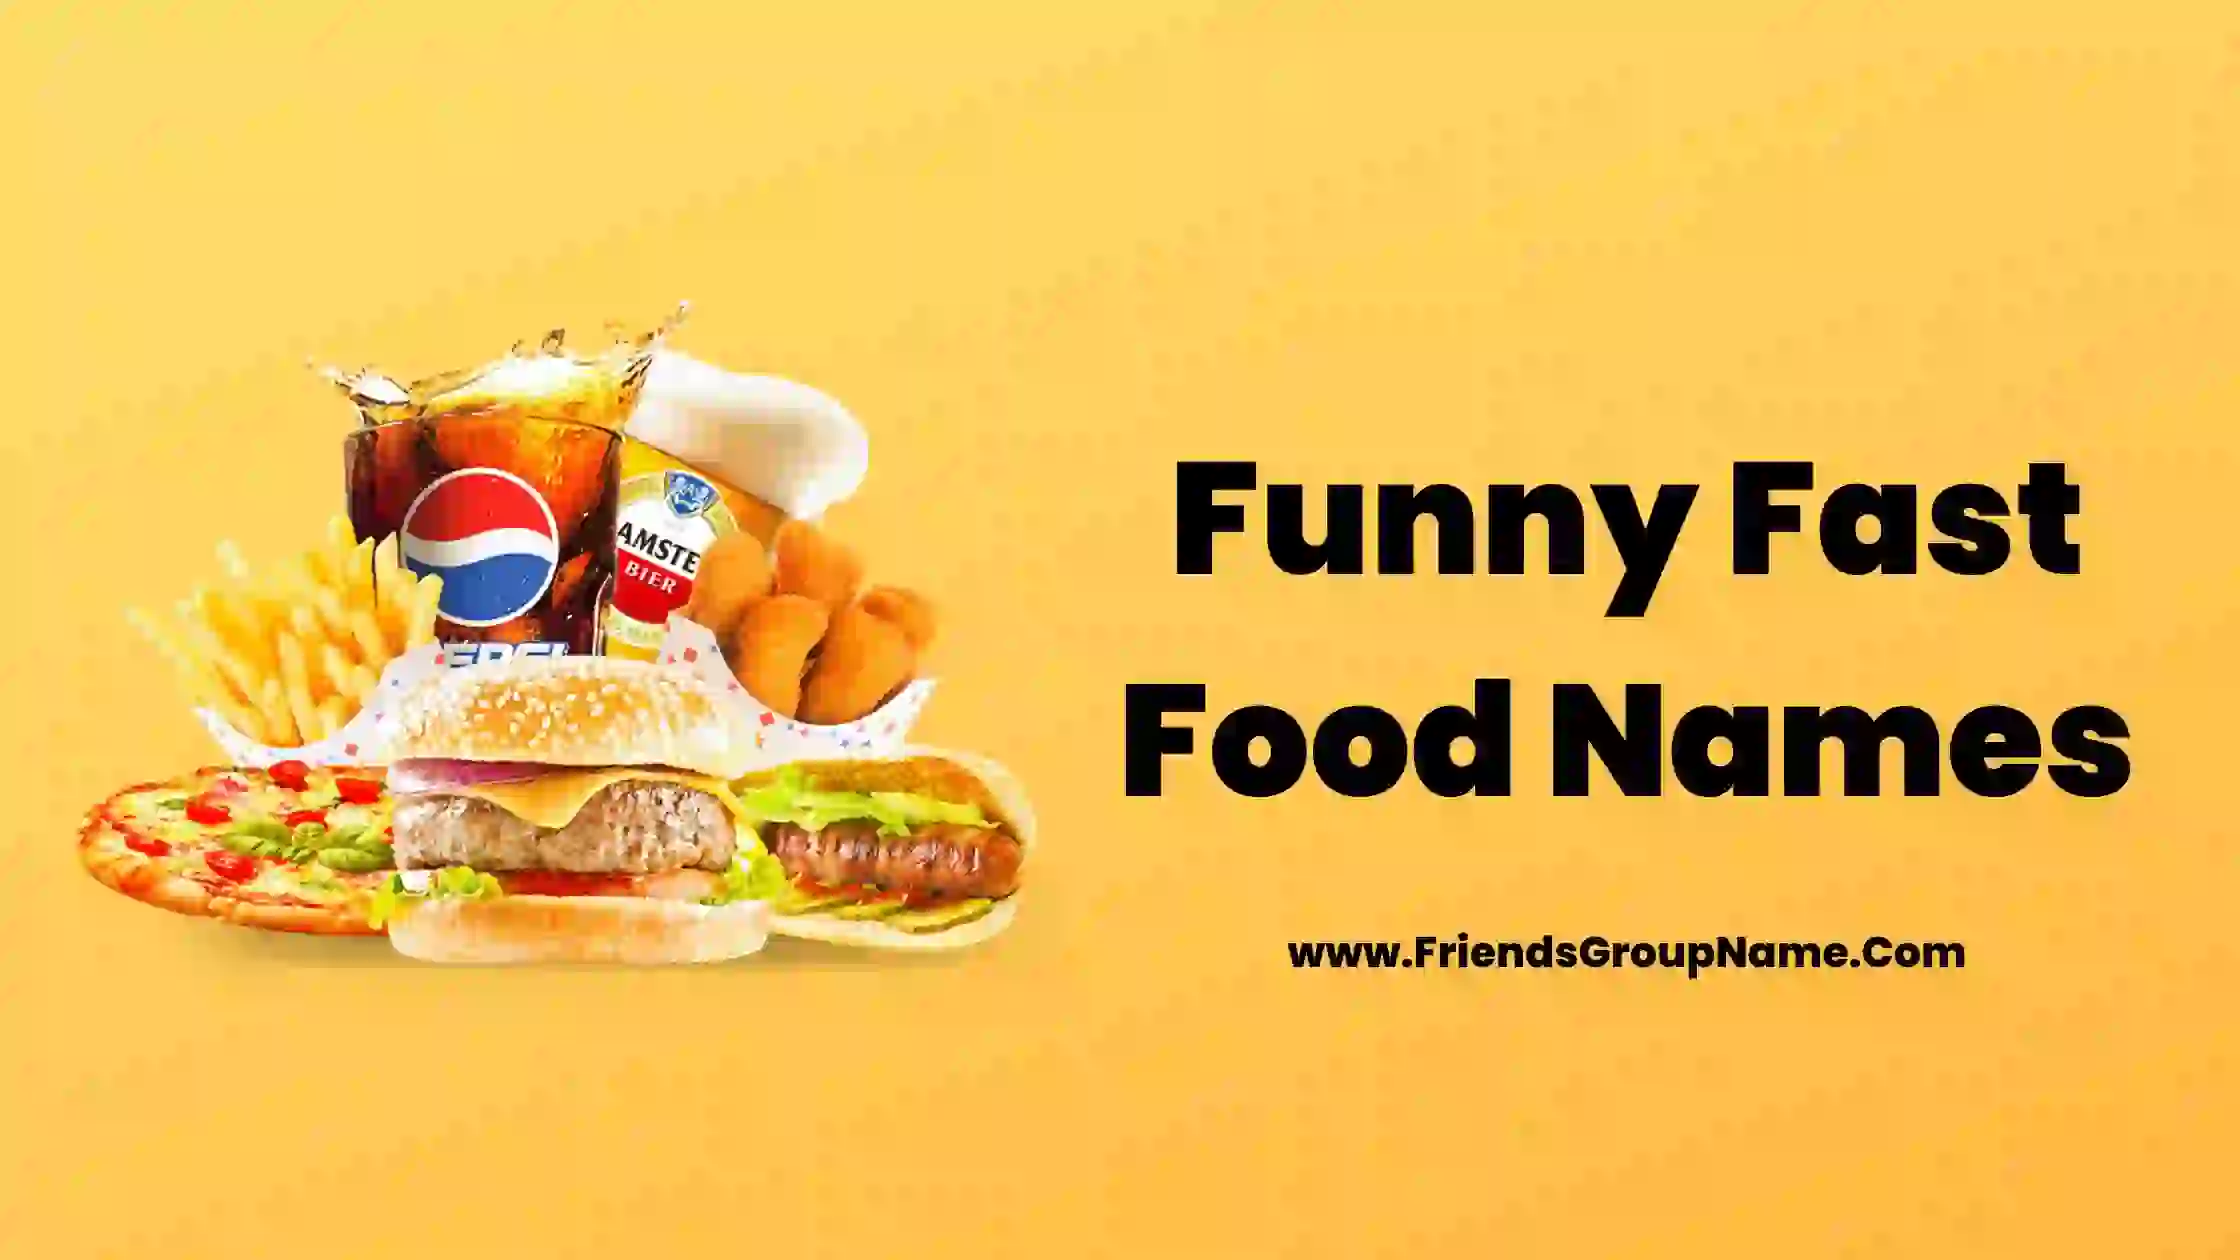 Funny Fast Food Names